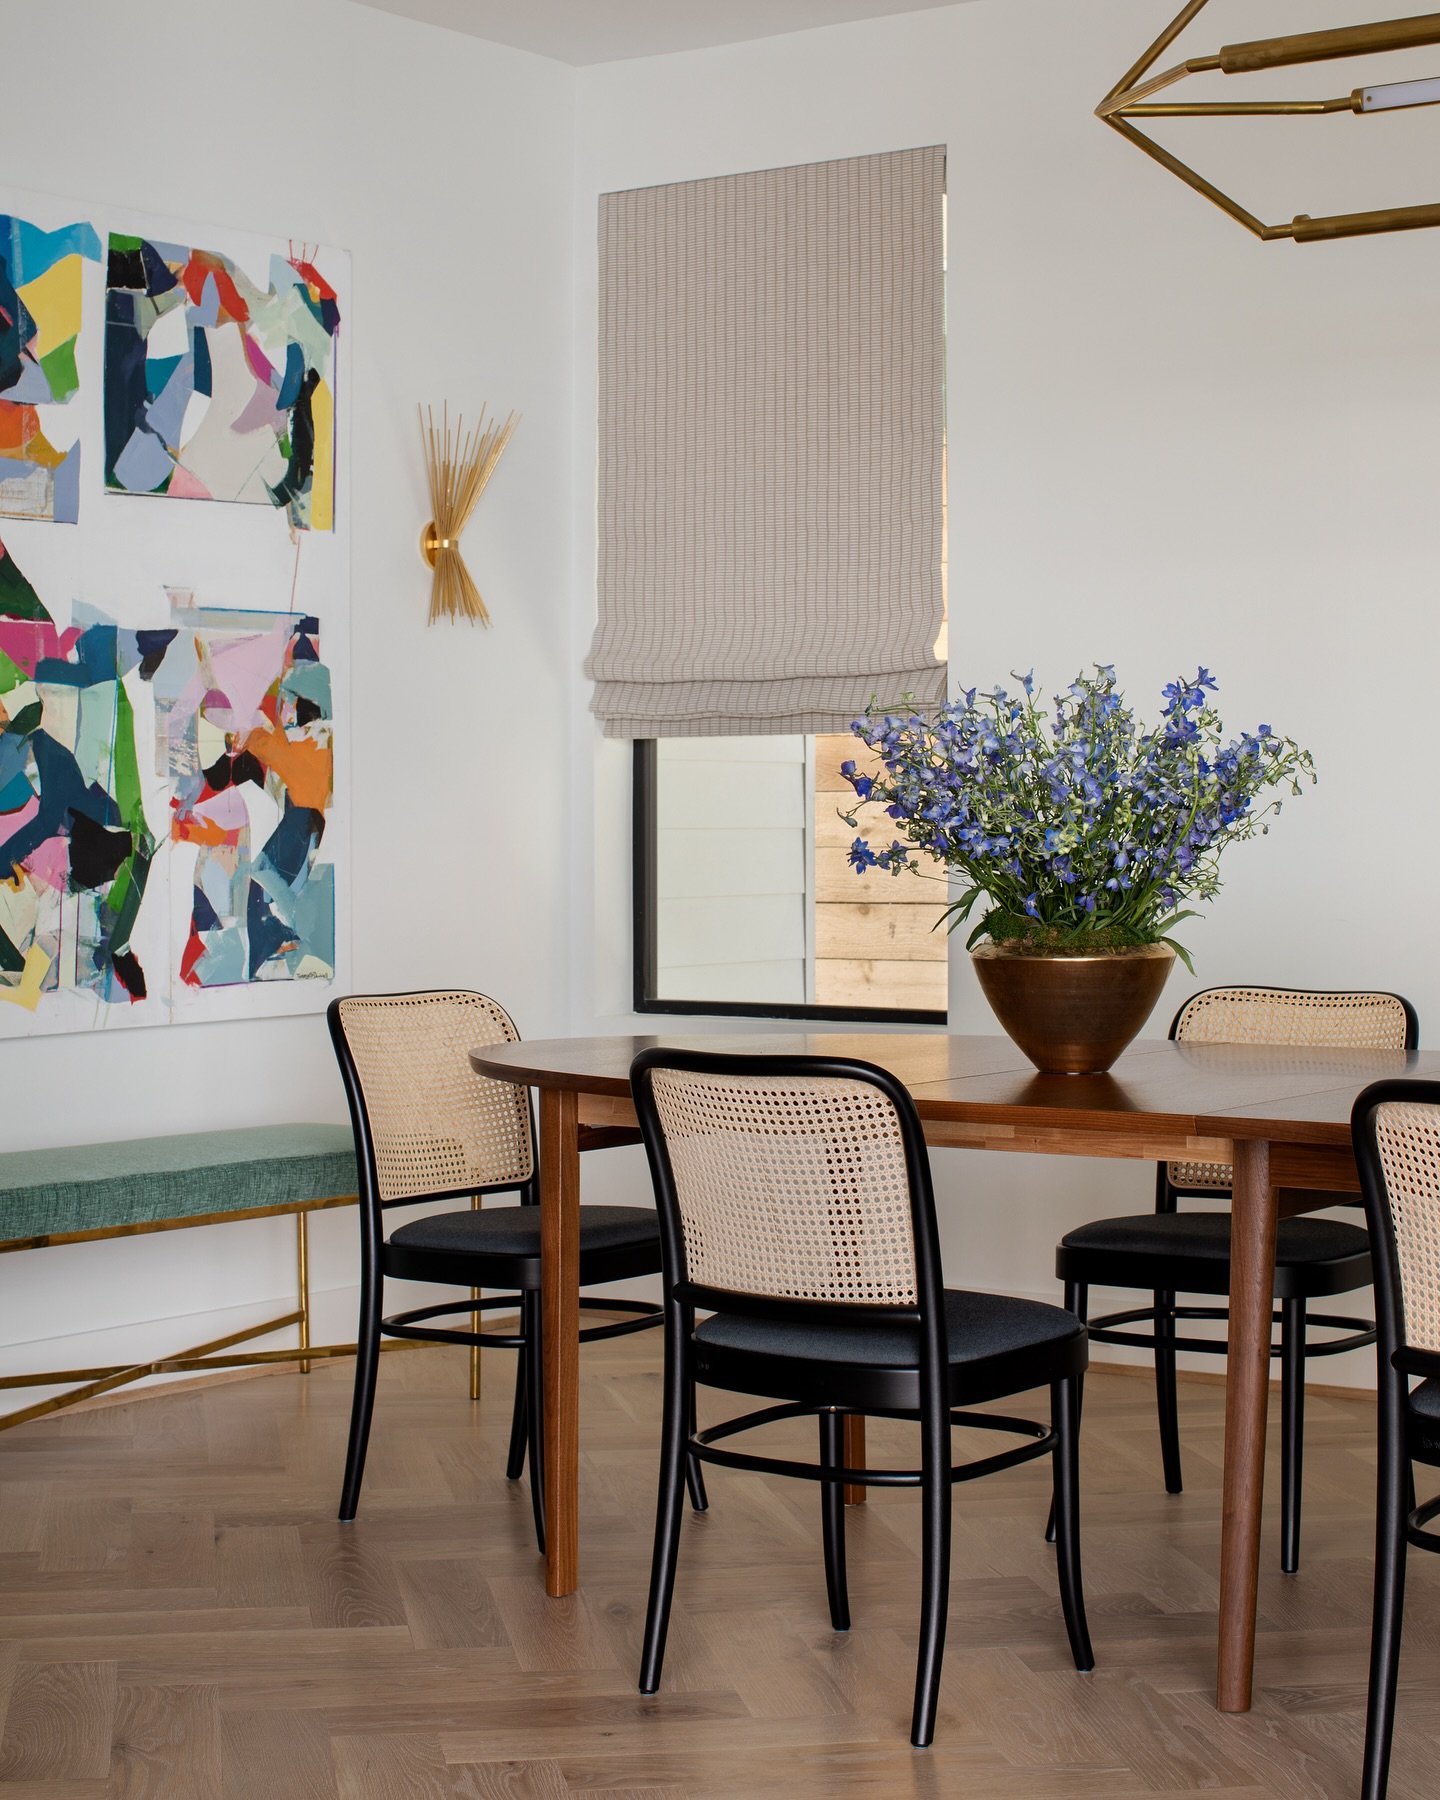 Dining in color. Our #PCInLivingColor dining room features mid-century modern moments with a hint of colorful glamour in the finishes and artwork on the walls.

Stylist: @Cate.Ragan.Styling
Photographer: @AimeeMazzenga

#PalomaContrerasDesign